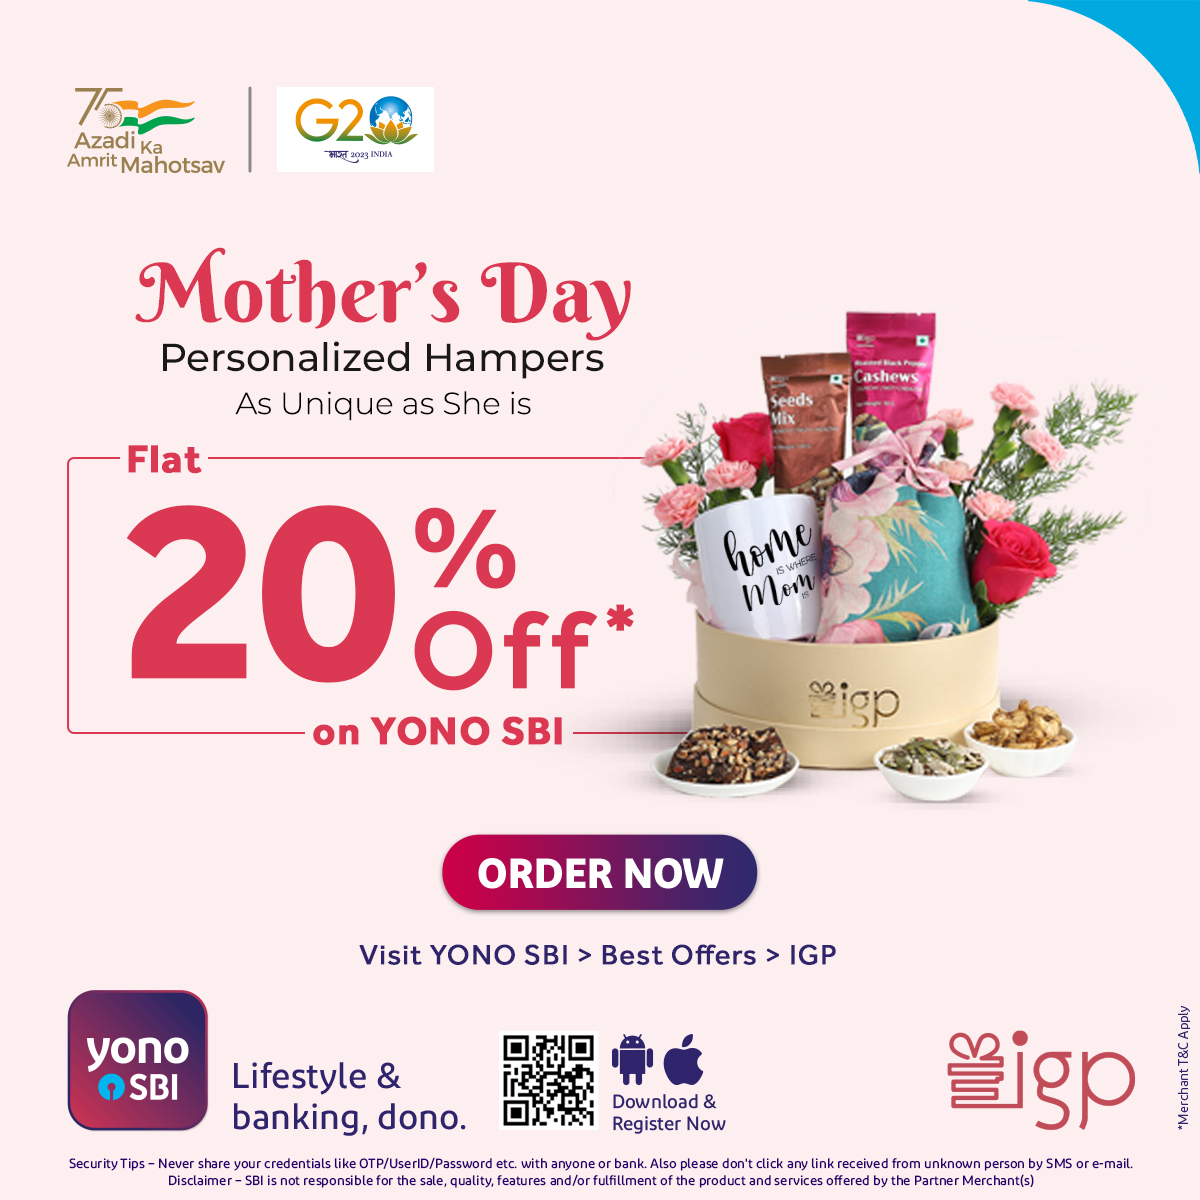 A special offer to let her know how much 'Special' she is. Happy Mother's Day!

#Gifting #IGP #MothersDay #GiftingOffers #GiftHampers #AmritMahotsav